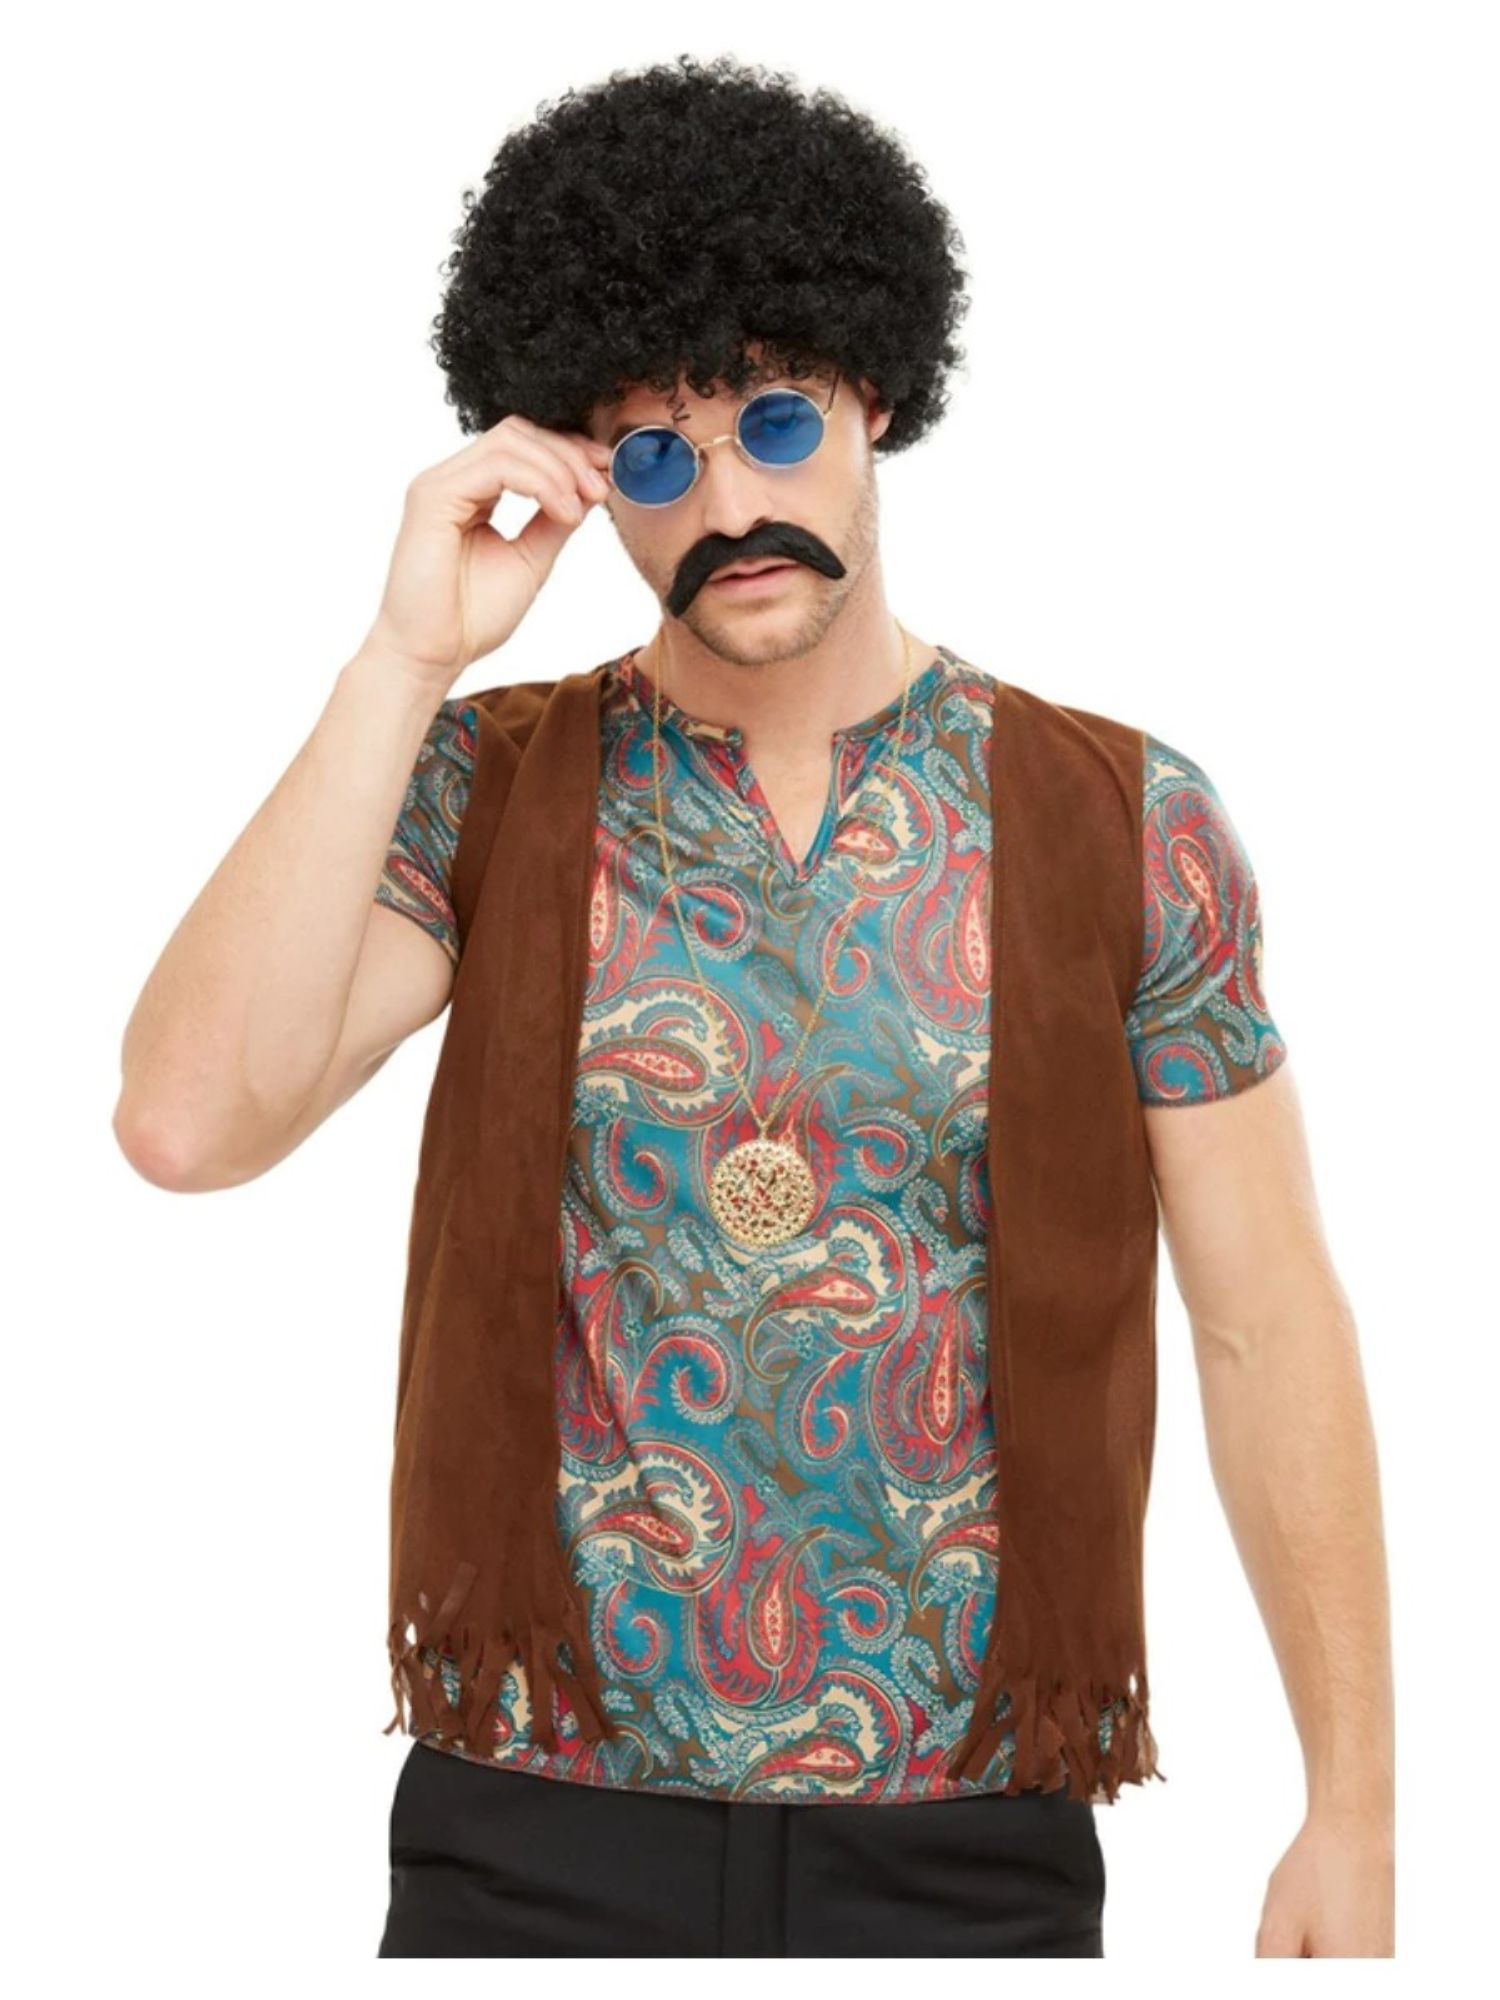 Smiffys 40" Black and Brown Unisex Adult Halloween Hippie Instant Kit Costume Accessory - One Size